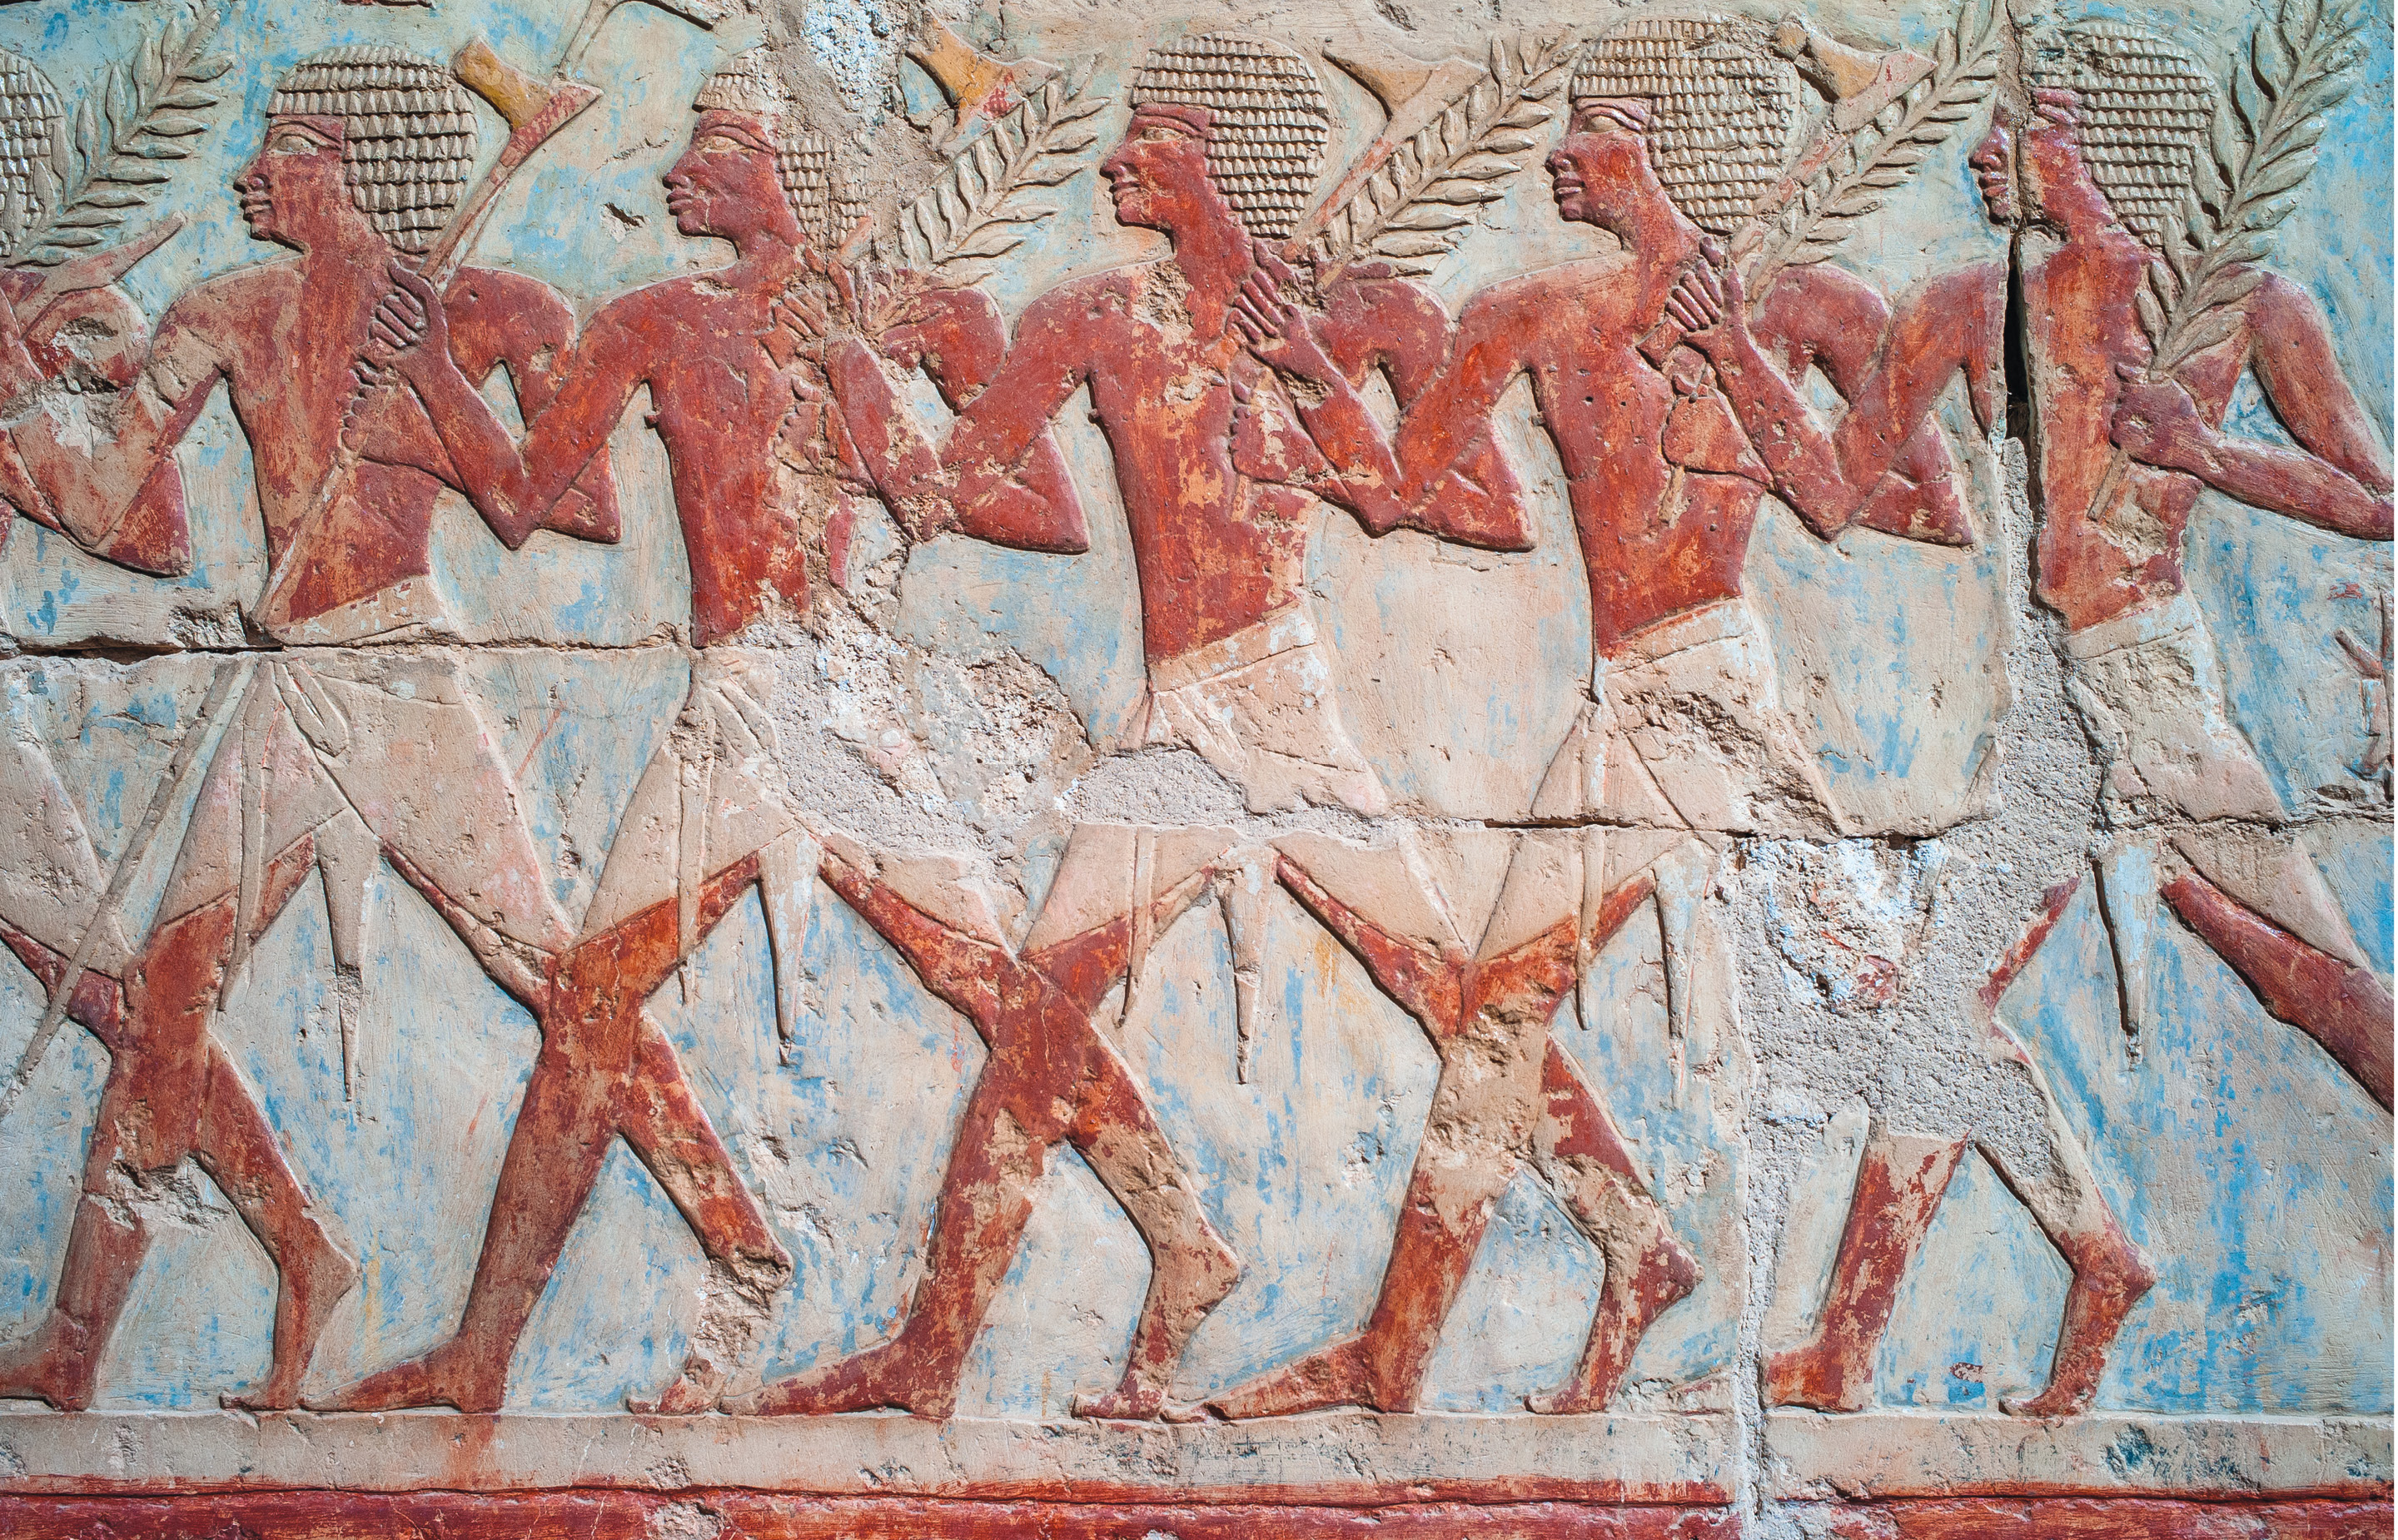 Relief in a mortuary temple in El-Bahari, Luxor, Egypt, depicting a trade expedition sent to Punt by Queen Hatshepsut, who ruled Egypt during the 15th century B.C.